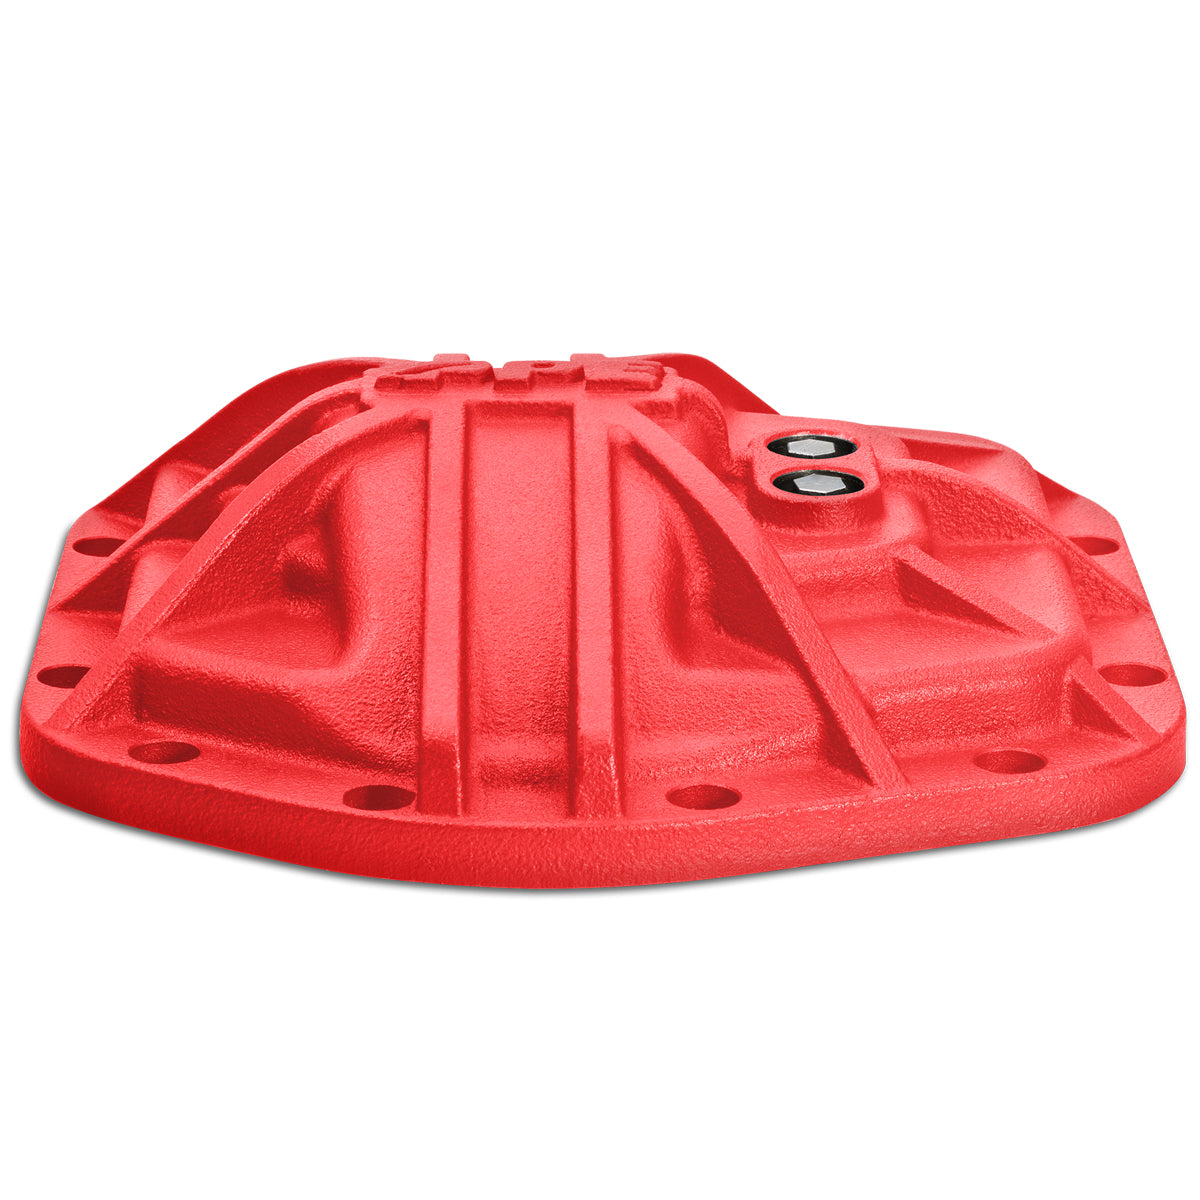 PPE Diesel 2018-2023 Jeep JL Sport Dana-M186 Heavy-Duty Nodular Iron Front Differential Cover Red 238043412